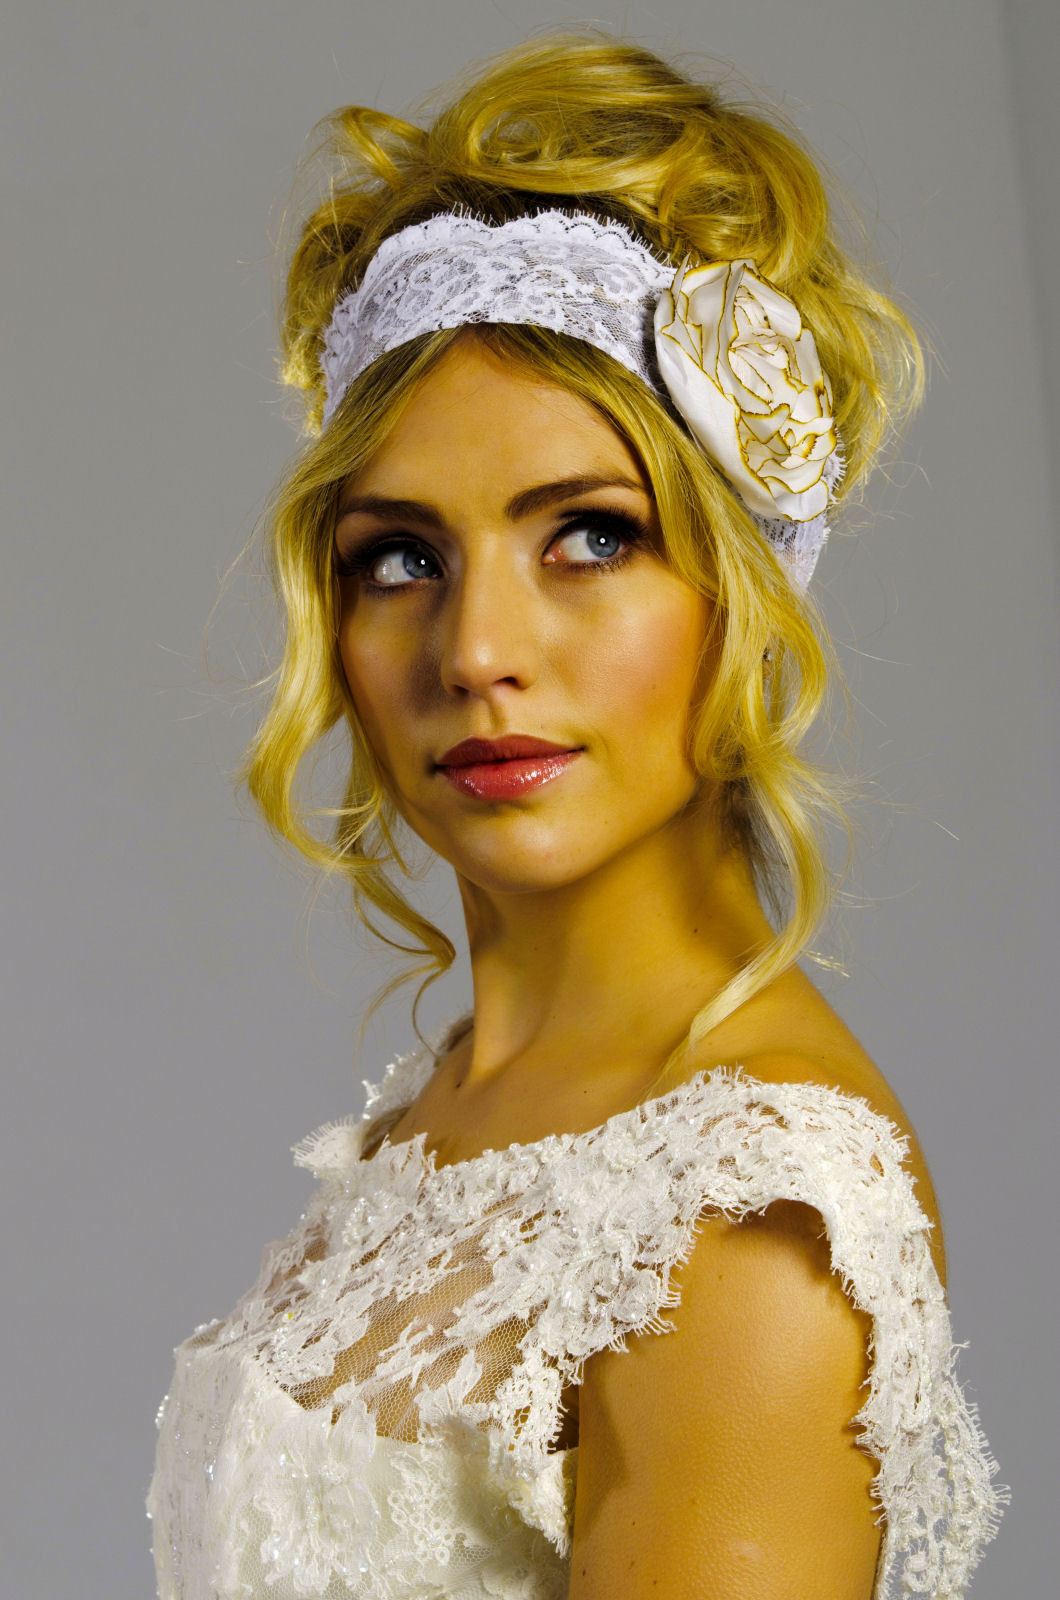 HT Headwear Bridal Headwear And Jewellery | hitched.co.uk